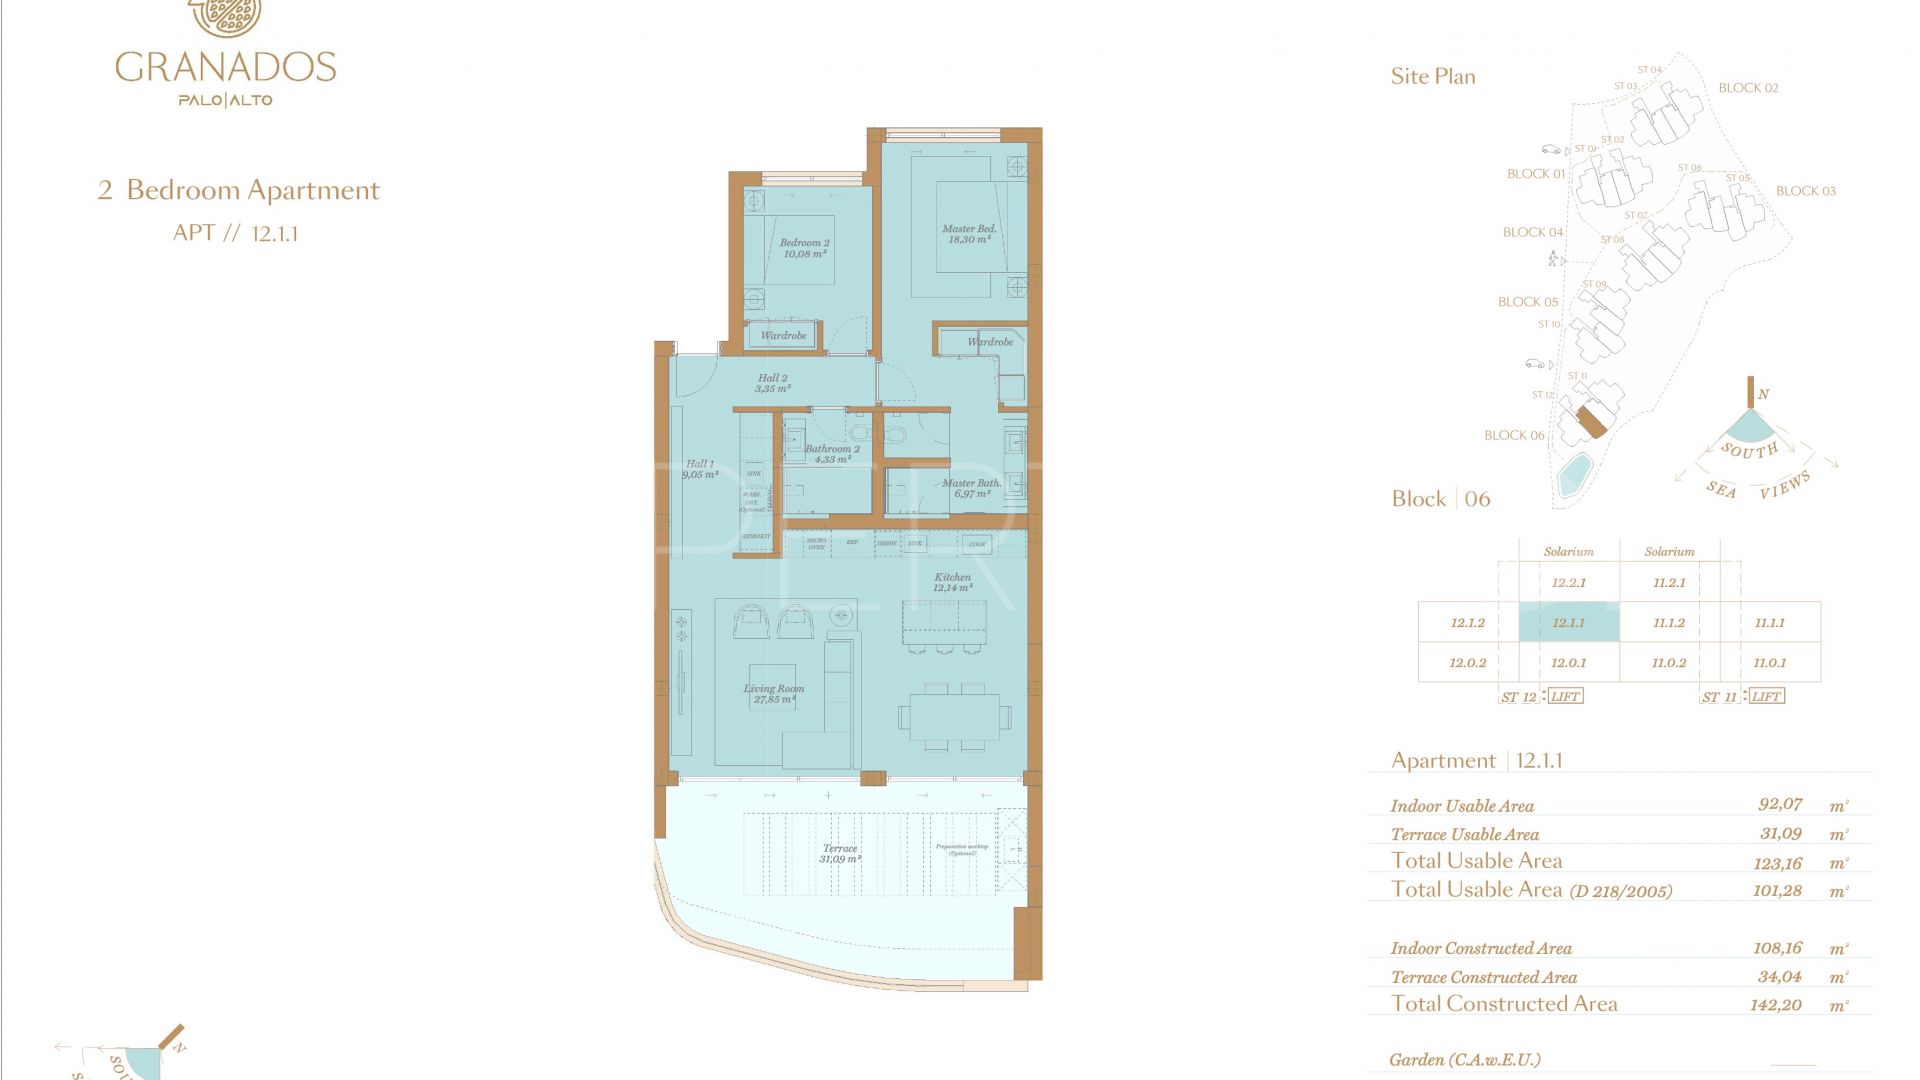 For sale apartment in Palo Alto with 2 bedrooms